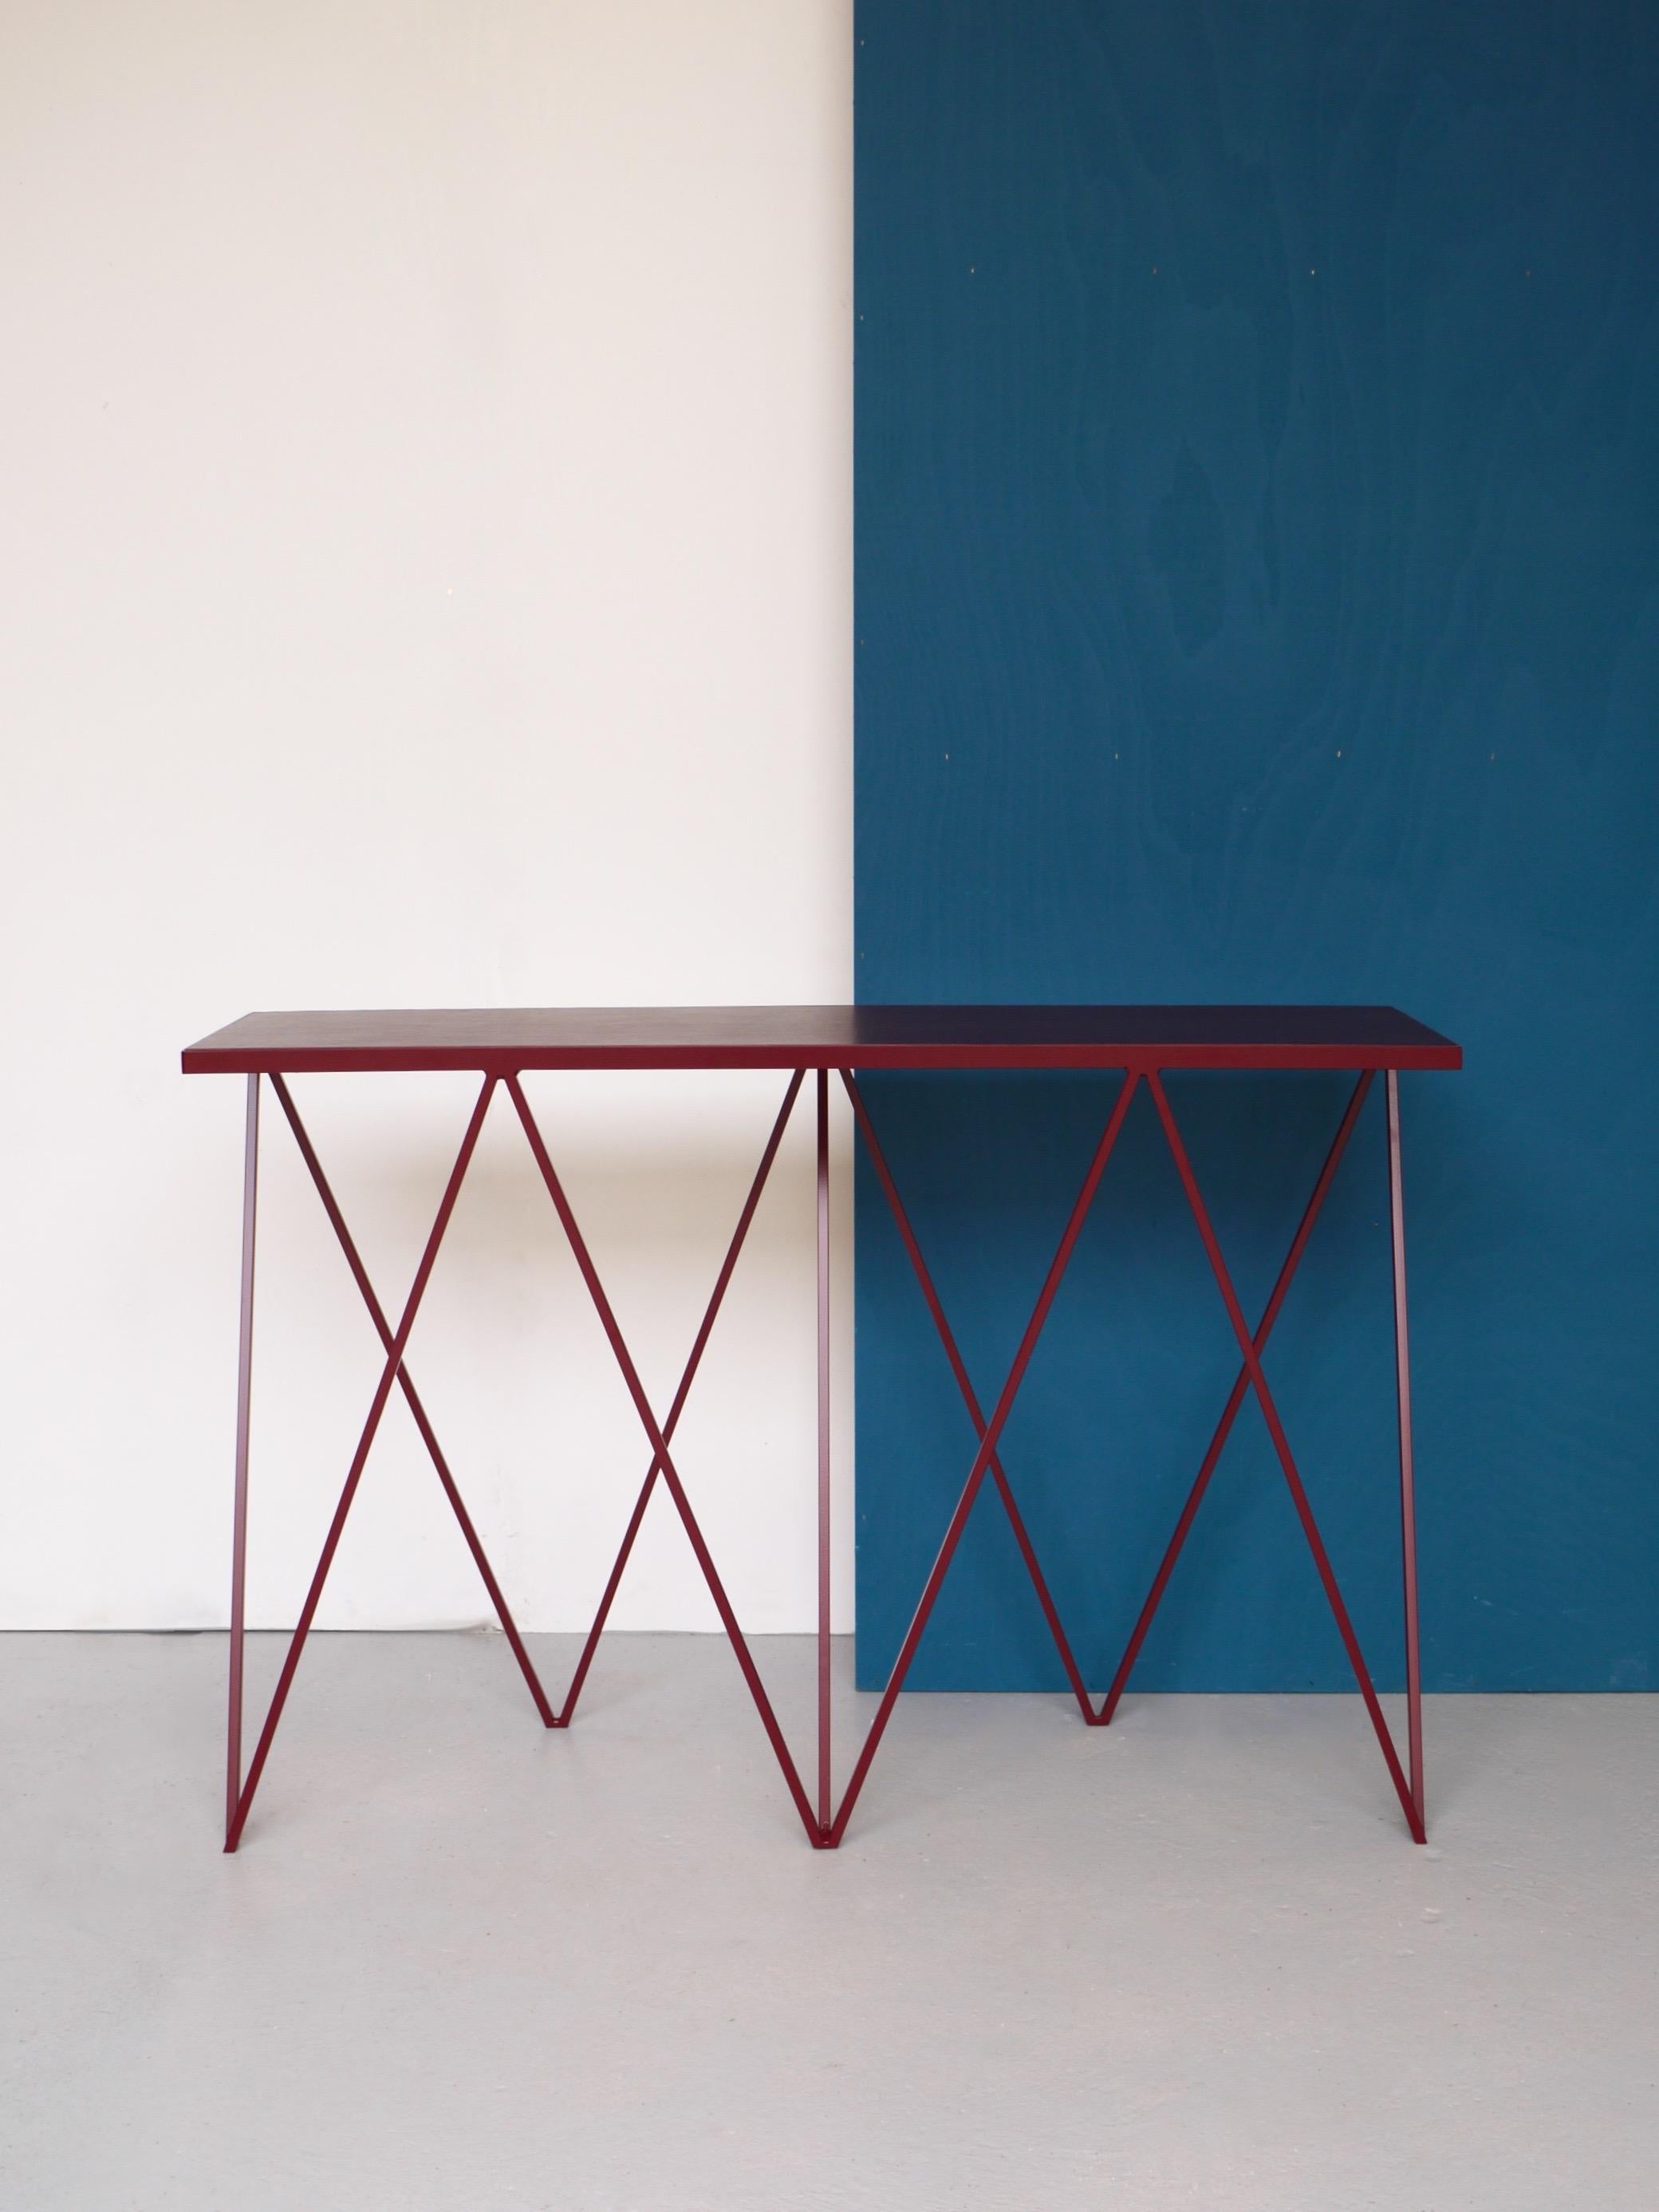 The Giraffe console table looks great against period details as well as in modern surroundings due to it's geometric and compact proportions. Made with powder-coated steel and environmentally friendly linoleum the Giraffe console table makes a